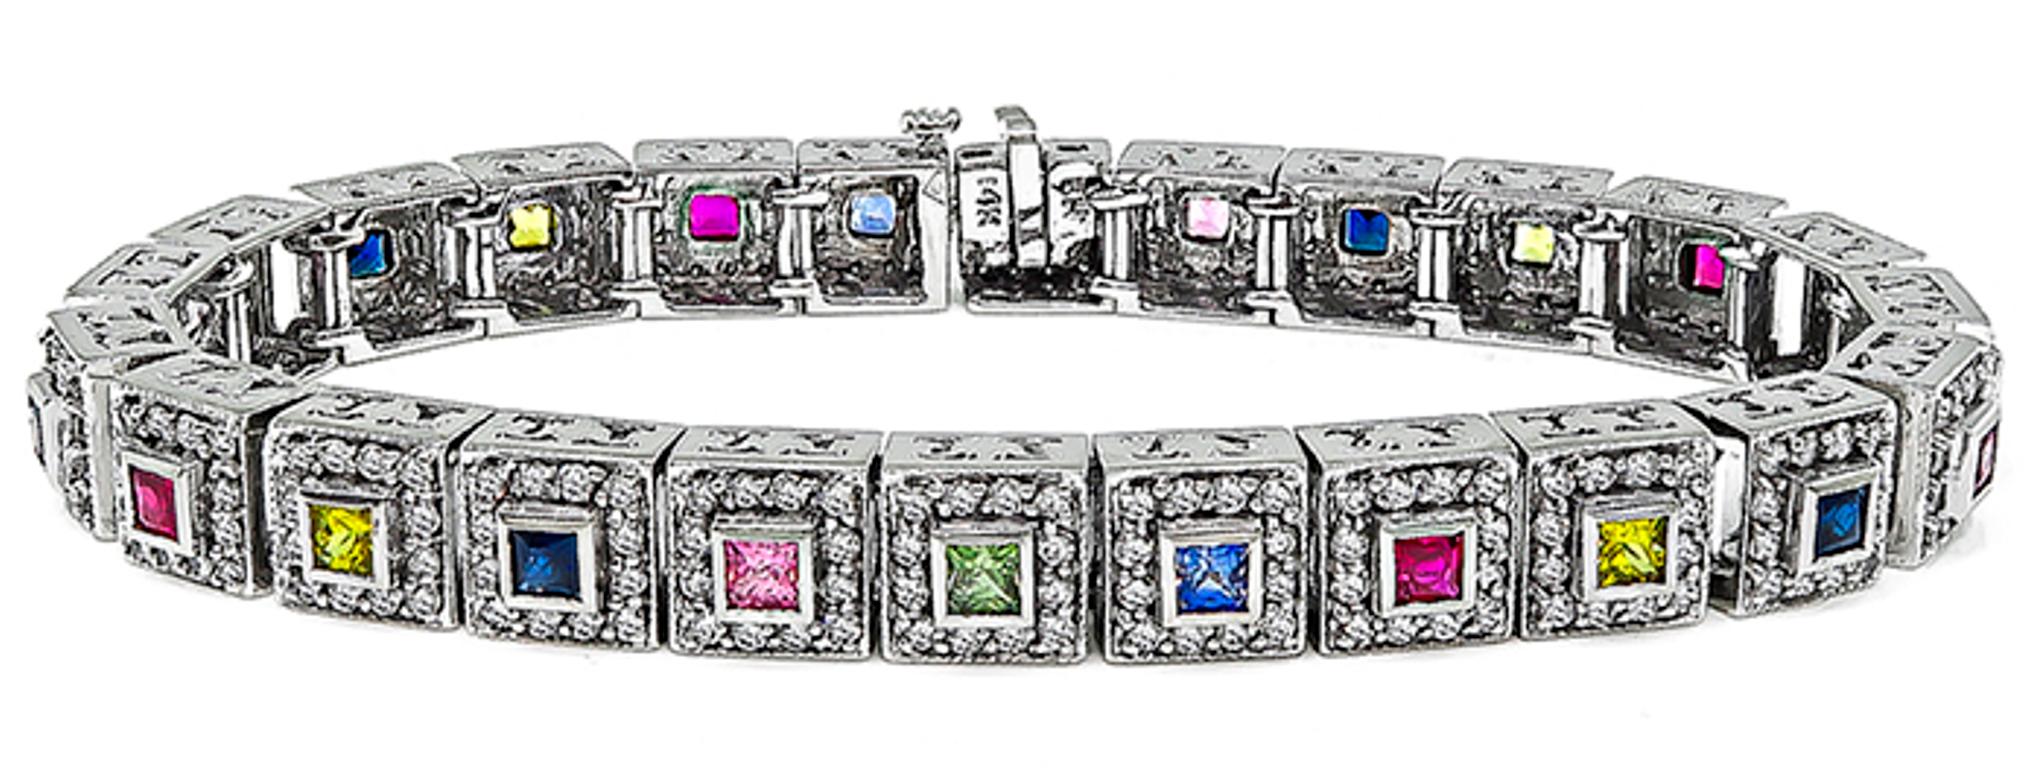 This amazing 14k white gold bracelet is set with sparkling round cut diamonds that weigh approximately 4.00ct. graded H color with VS clarity. The diamonds are accentuated by lovely princess cut multi-colored sapphires and rubies that weigh 1.60ct